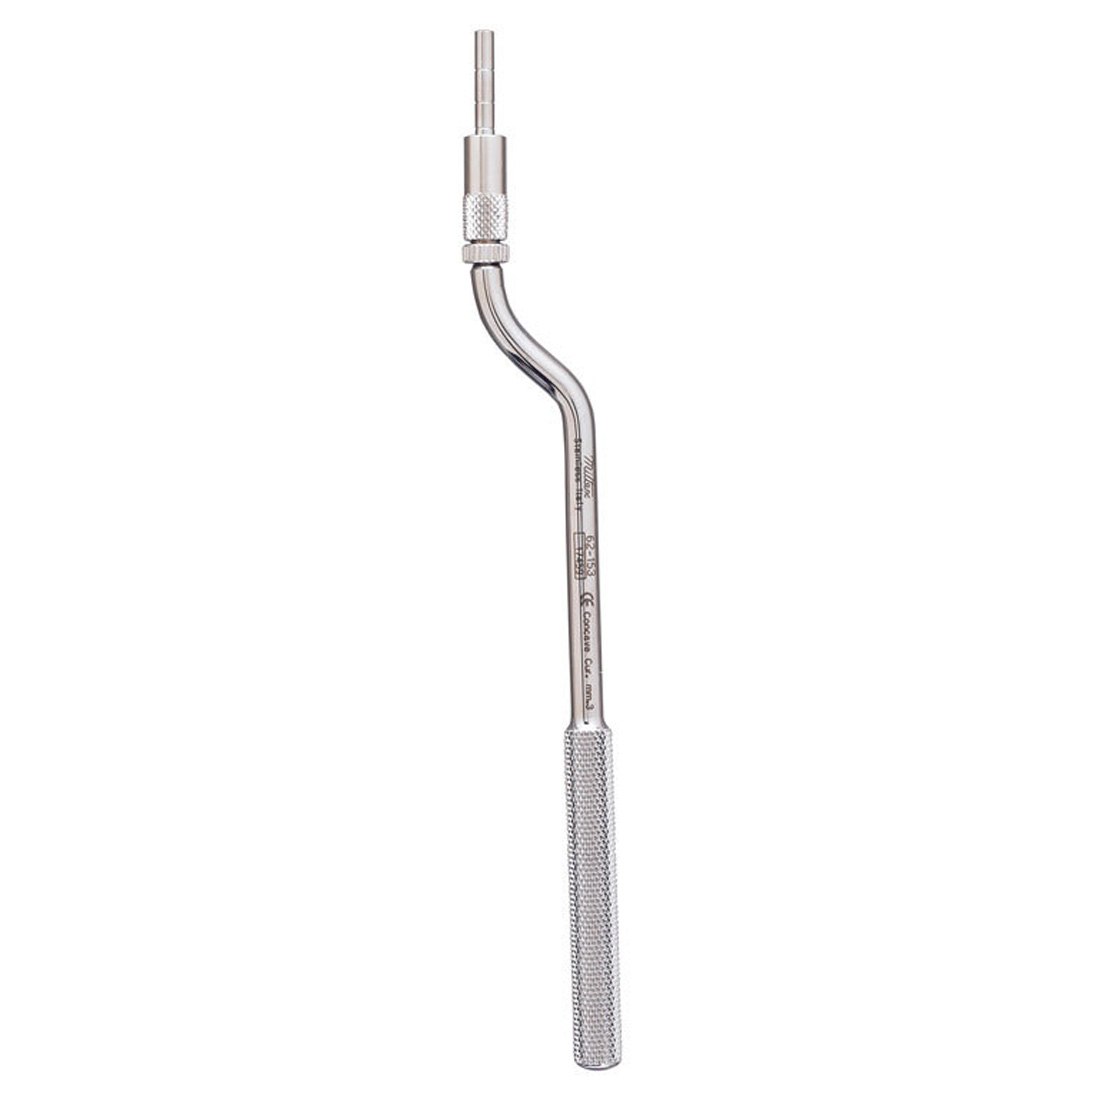 Concave Osteotome w/Stop Curved 3mm